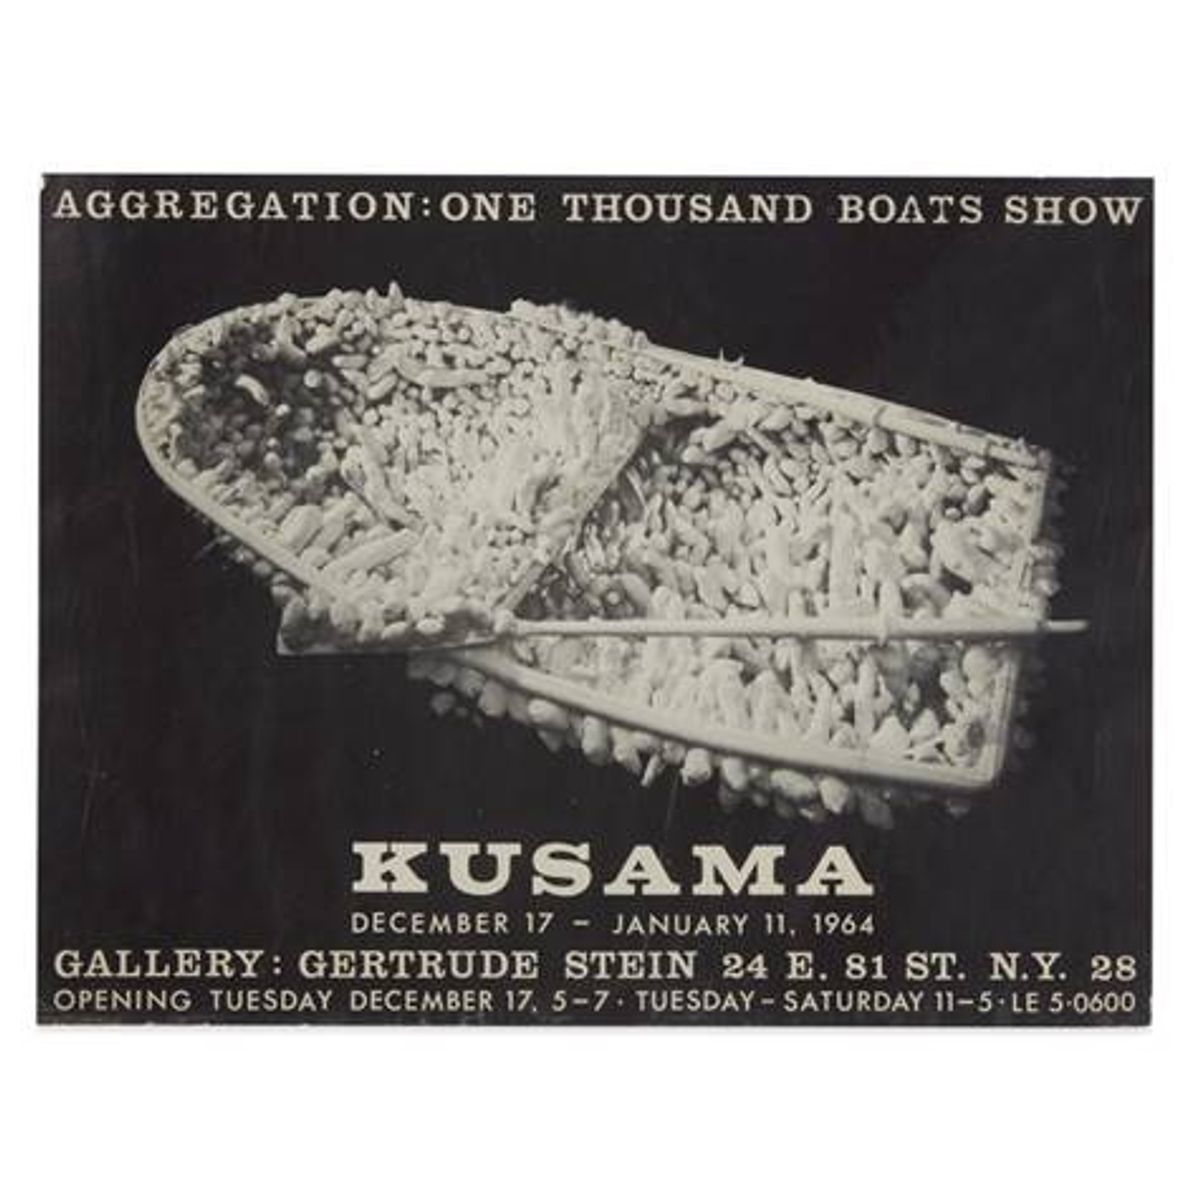 As part of WADDA's oral history project, cofounder Véronique Chagnon-Burke is working with Gallery Gertrude Stein, which gave Yayoi Kusama an early career solo show in New York in 1964. Above: Poster for Aggregation: One Thousand Boats Show: Kusama, Gallery Gertrude Stein (1964) Courtesy of the Gallery Gertrude Stein
